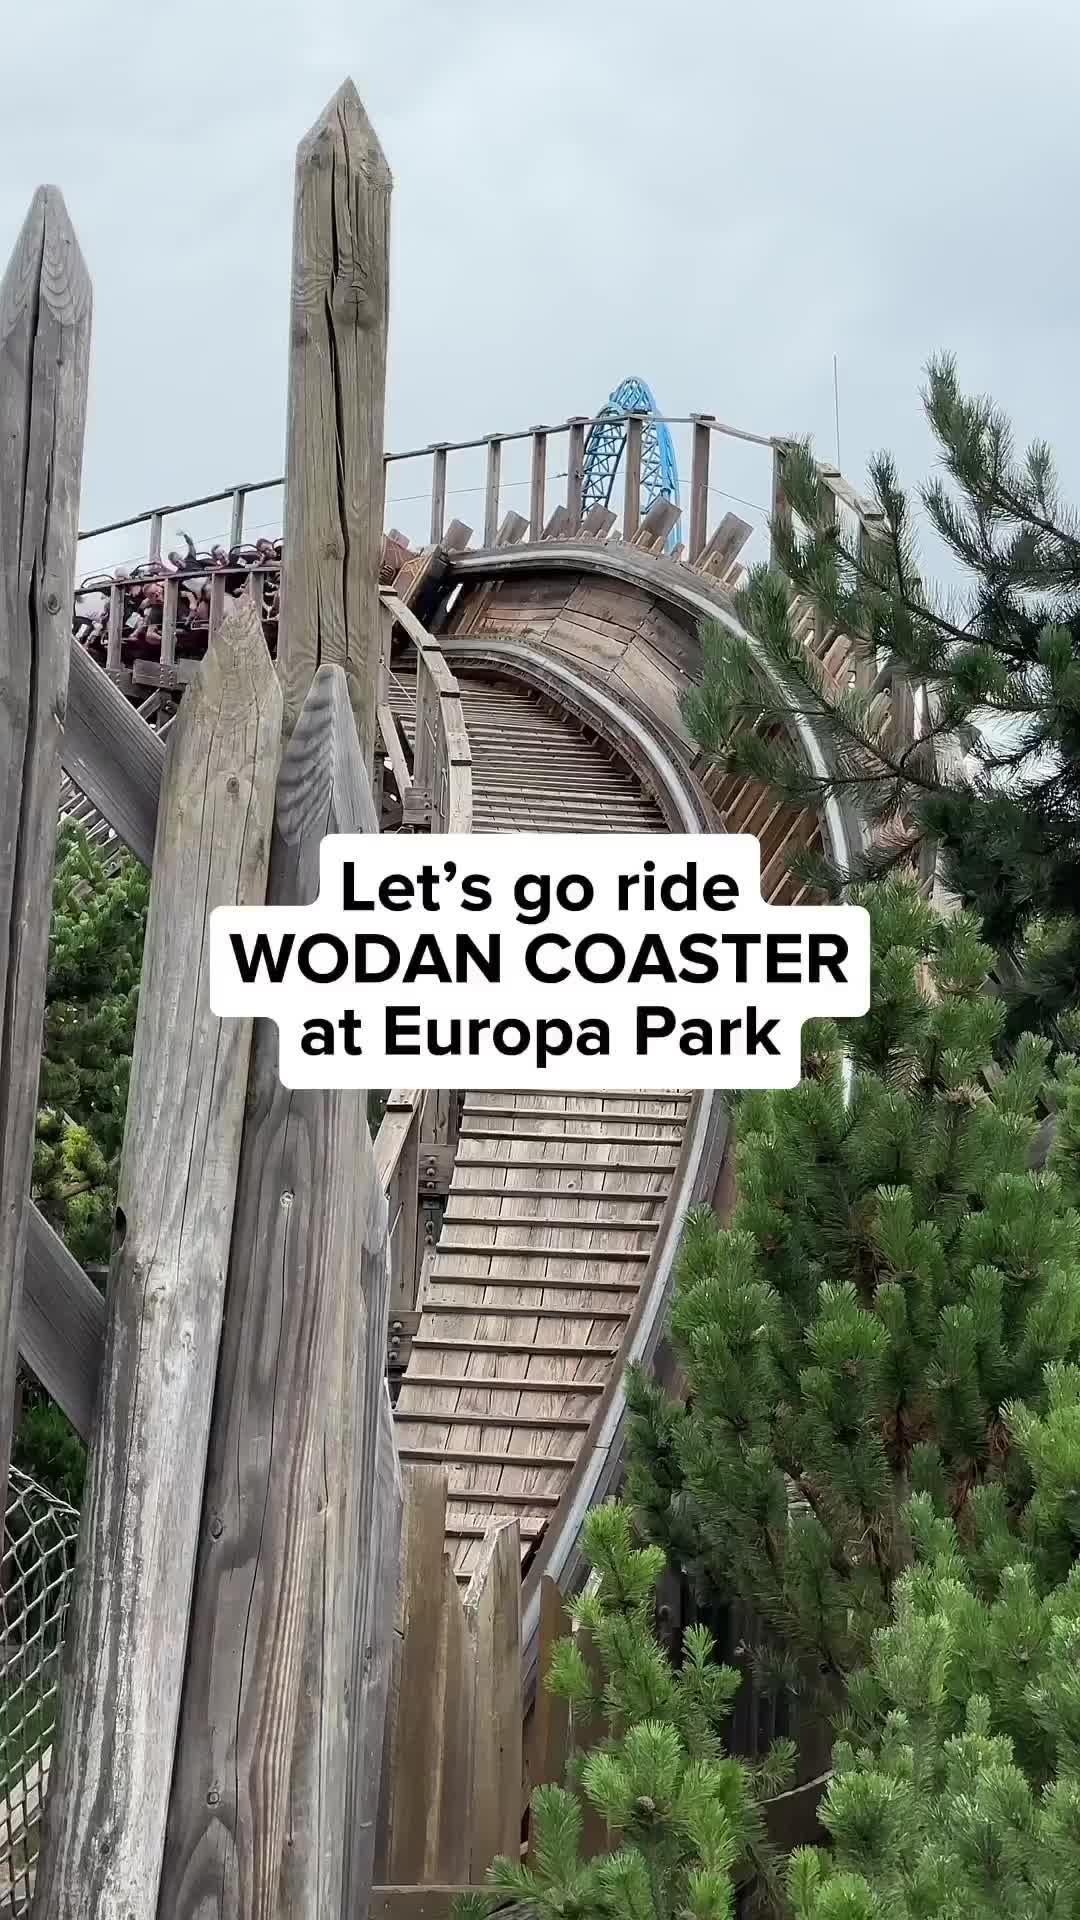 2nd Time's the Charm at Europa Park's Wodan Coaster